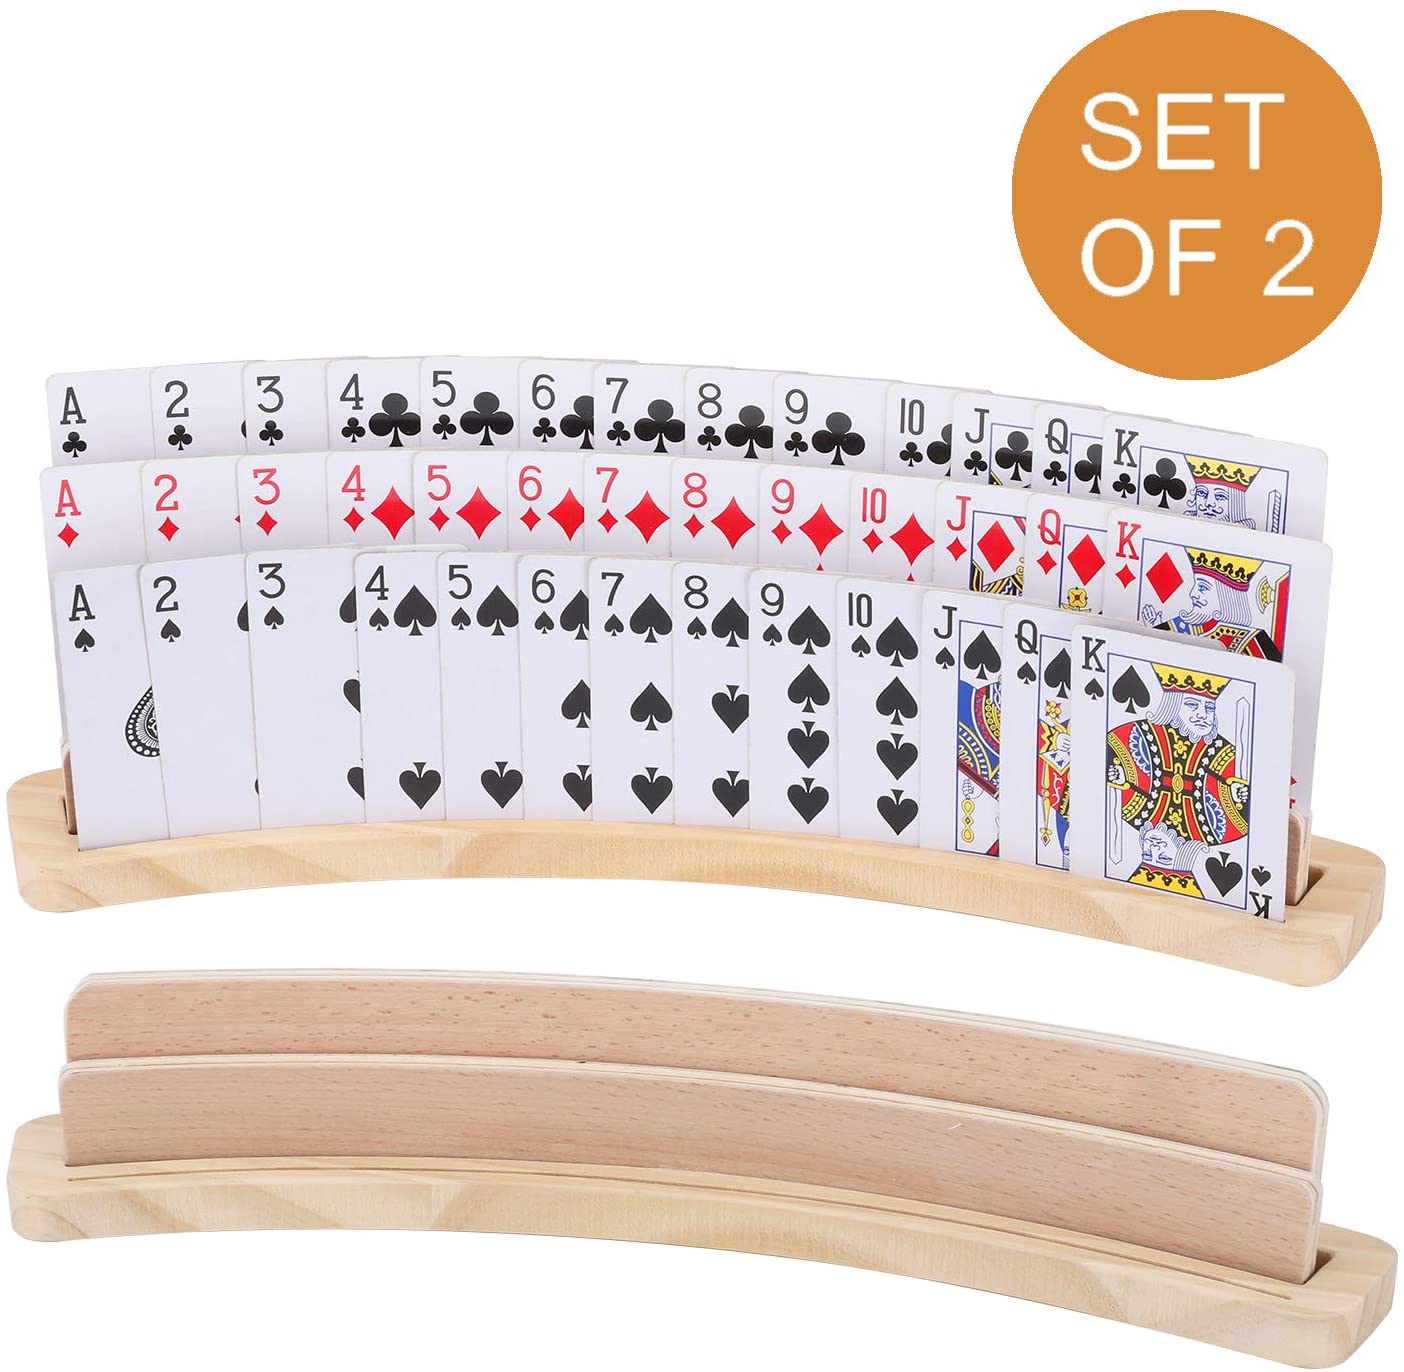 GSE Games & Sports Expert 14 inch Wooden Playing Card Holders for Kids, Adults and Seniors (2-Pack), Brown